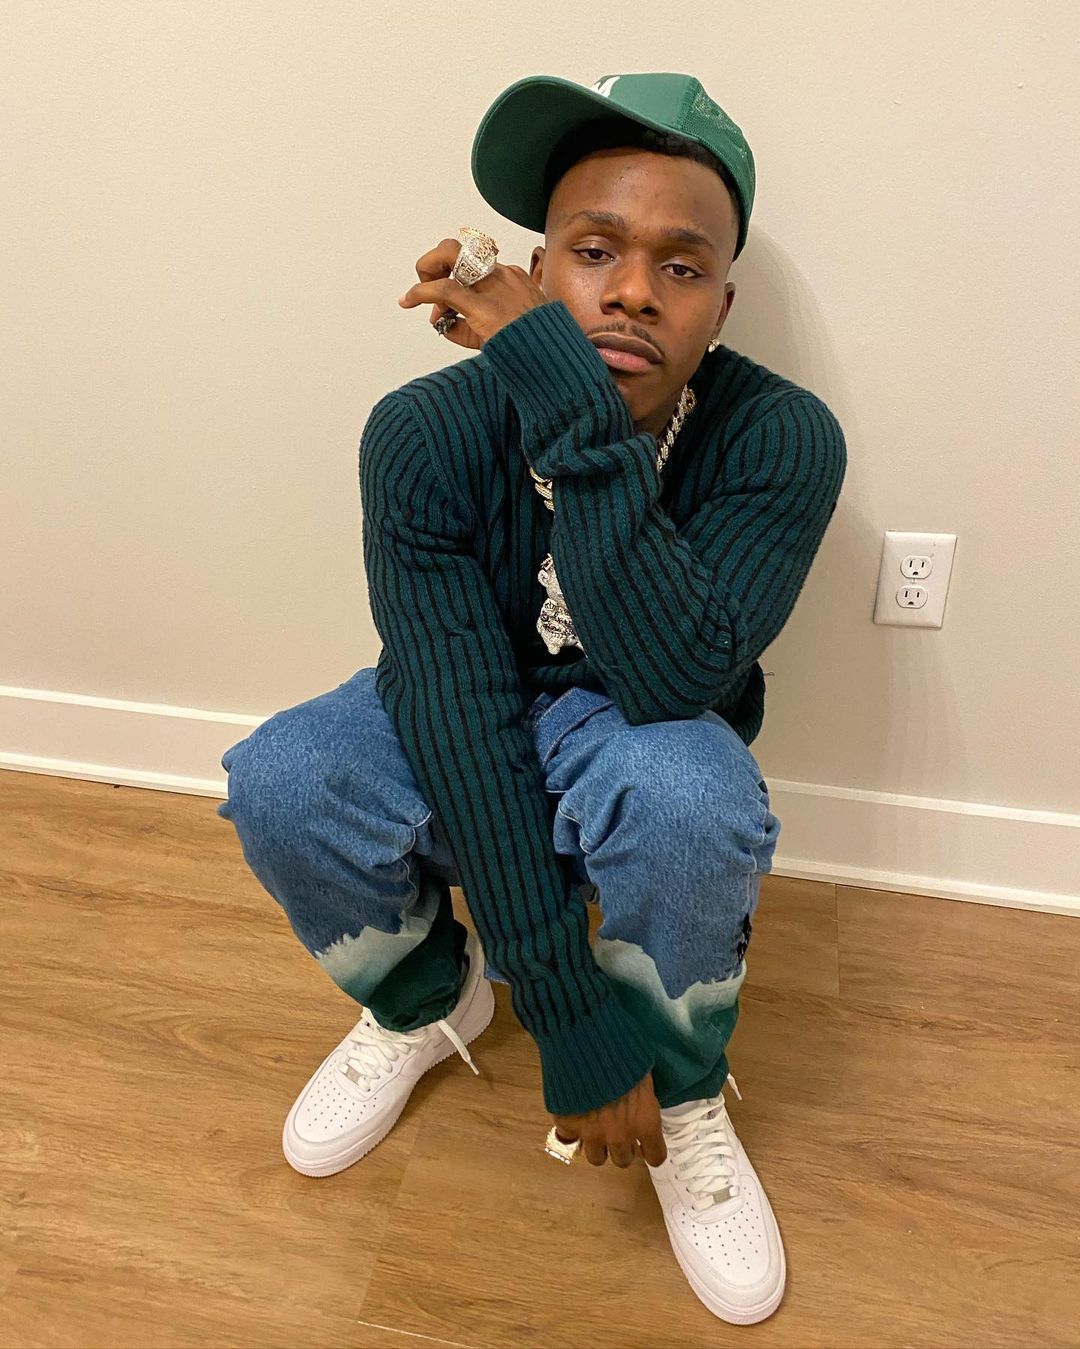 dababy-arrested-olamide-baddo-most-indigenous-artist-arsenal-takes-loan-latest-news-global-world-stories-friday-january-2020-style-rave